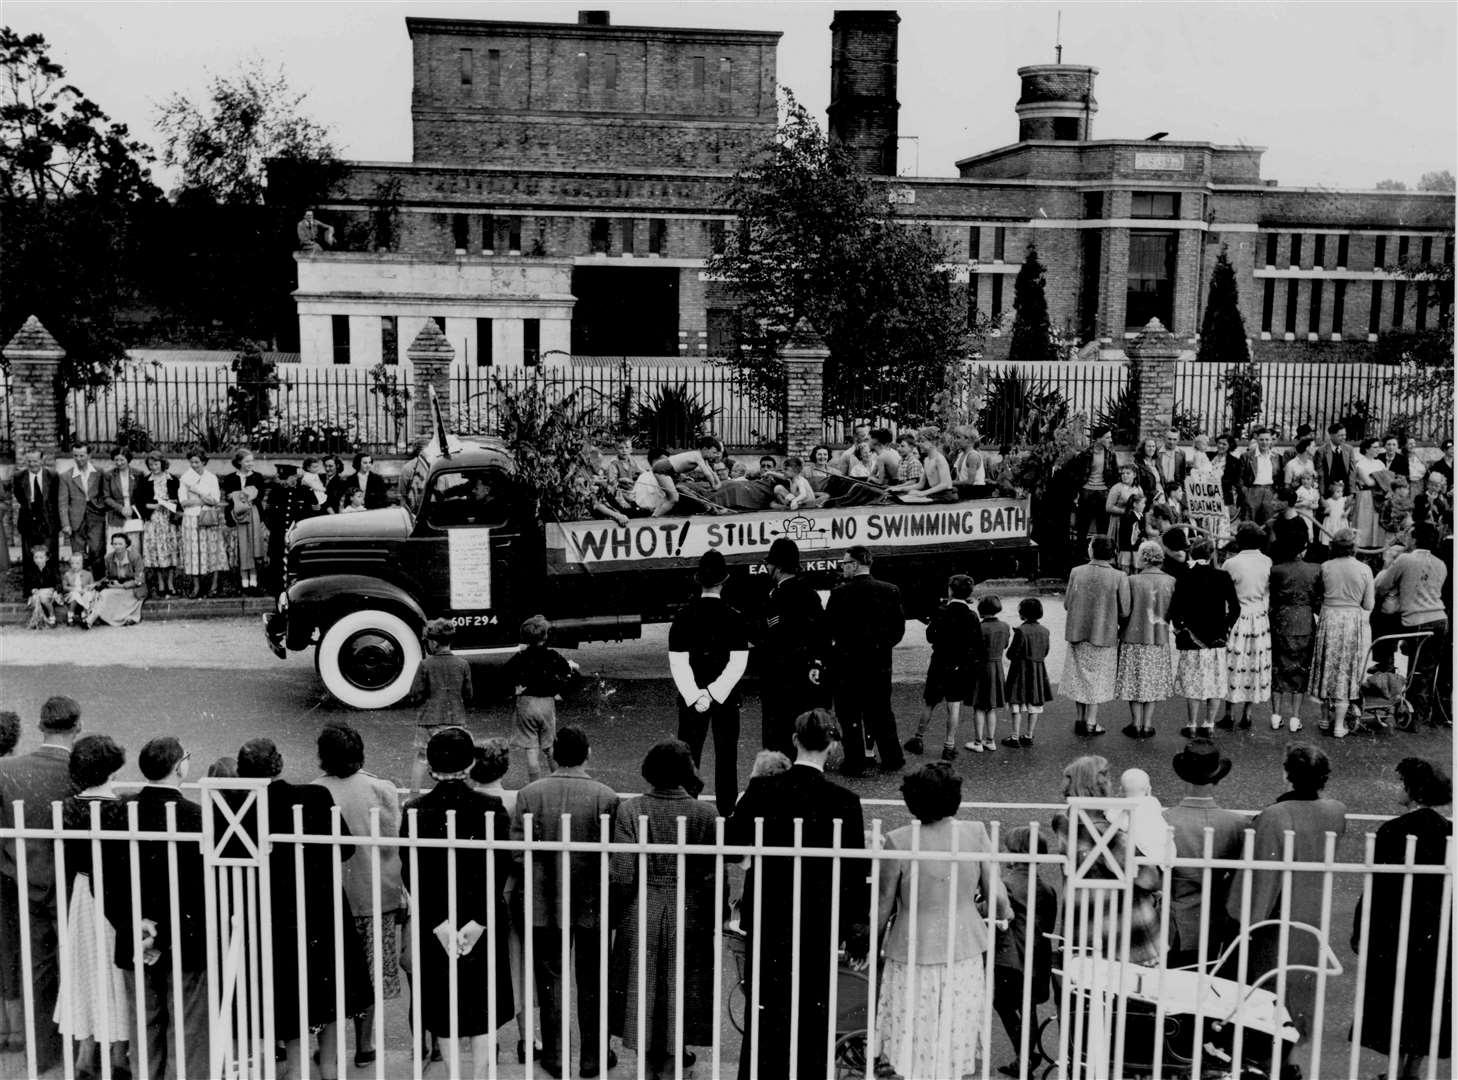 The open-air baths at Whitehall Road, Canterbury, had been closed to swimmers since the war - and the pool at Kingsmead did not open until 1970. There was a long campaign for an alternative as this 'Kingsmead Lido' float demonstrates in the carnival in August 1954